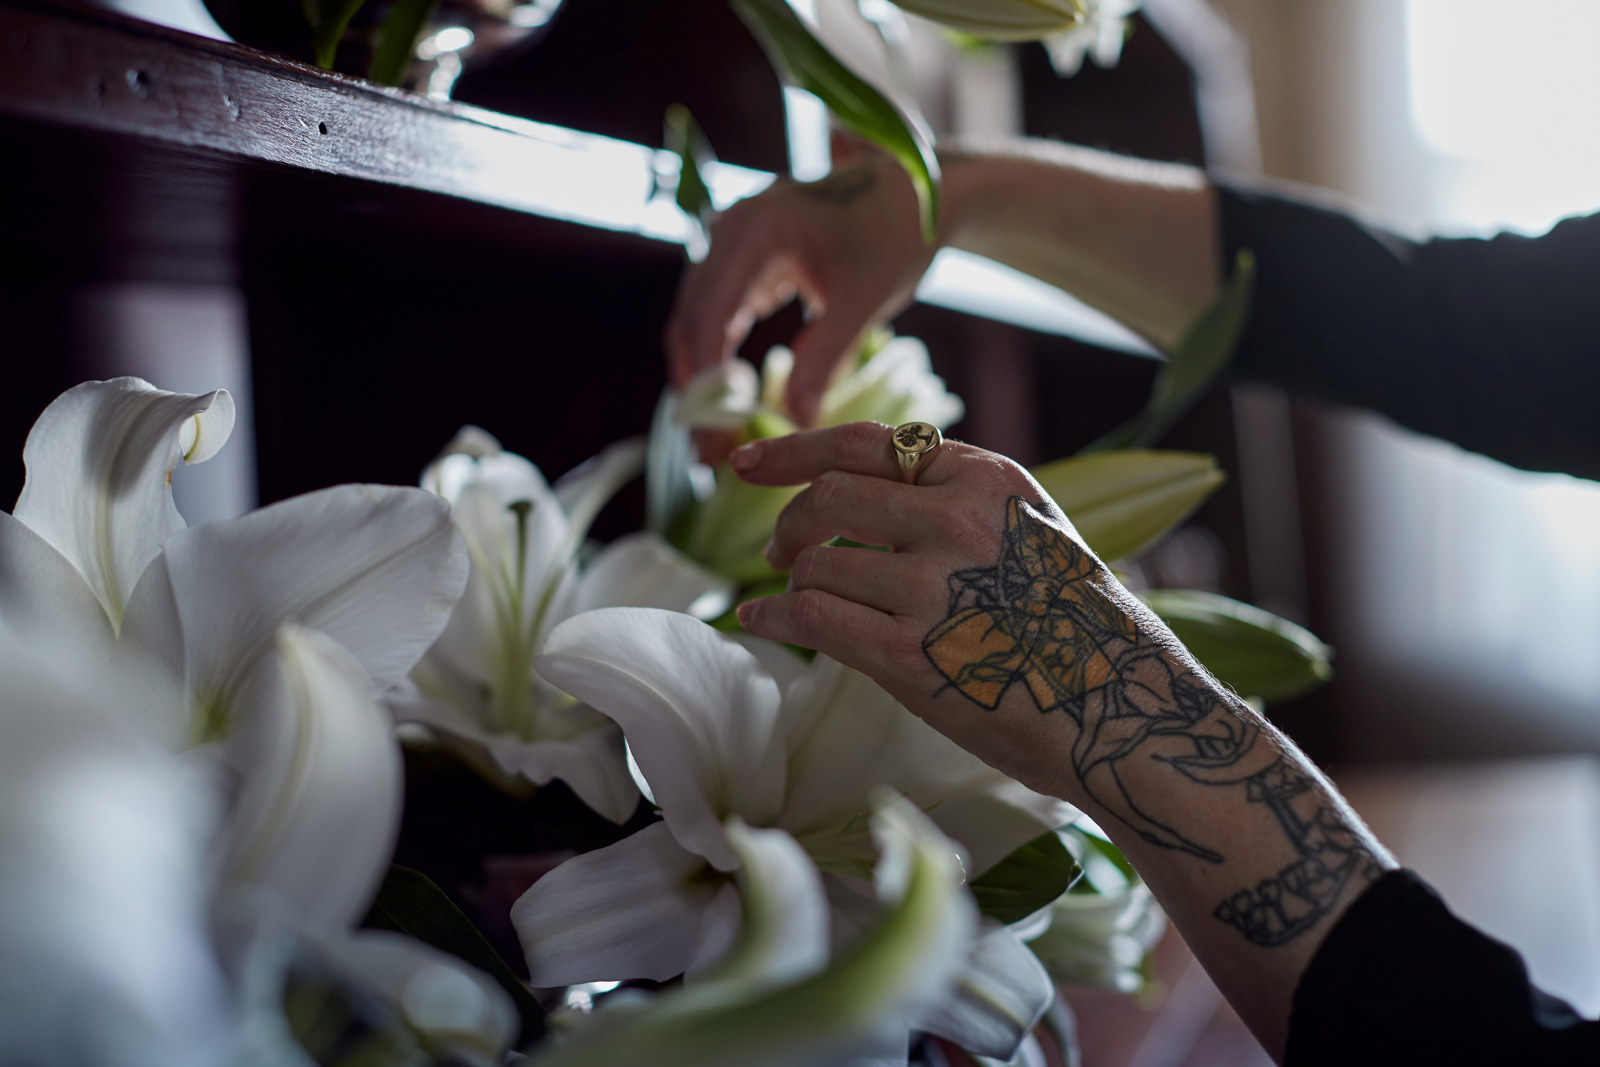 A close up of Lillies in the buffet and Doctor Cooper's hands in the Vaucluse House kitchen as part of her work 'CHURCH FLOWERS AFTER THE BUTCHER, THE BONER; IN THE KITCHEN, THE LARDER' by Doctor Lisa Cooper